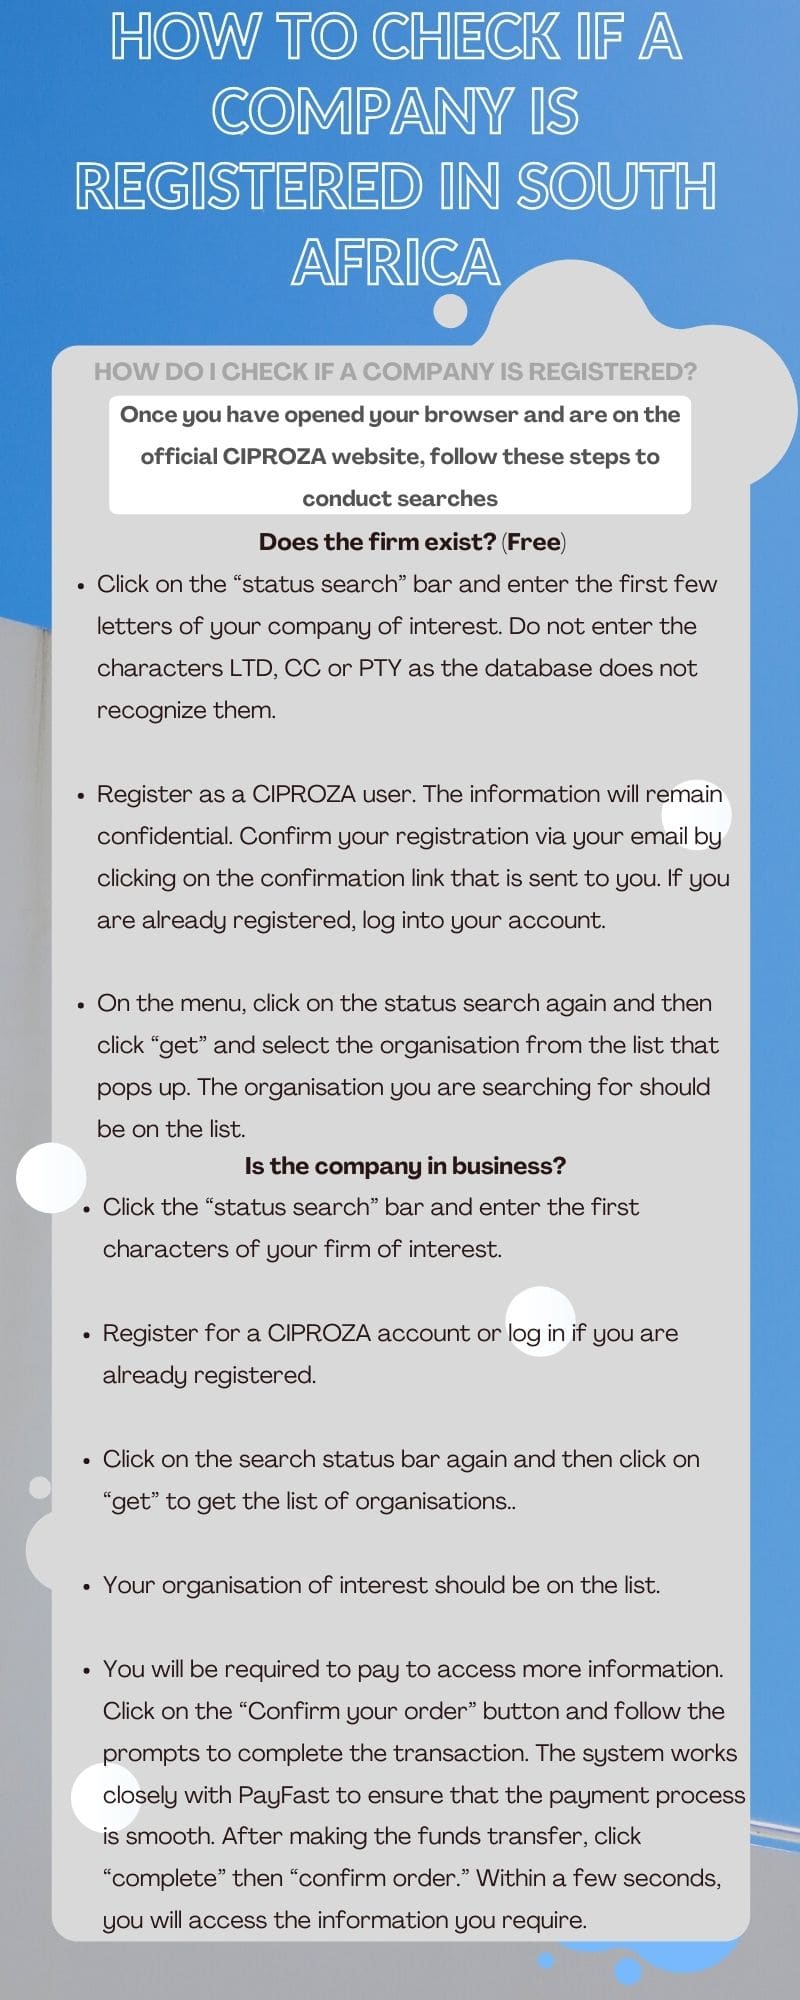 How to check if a company is registered in South Africa today